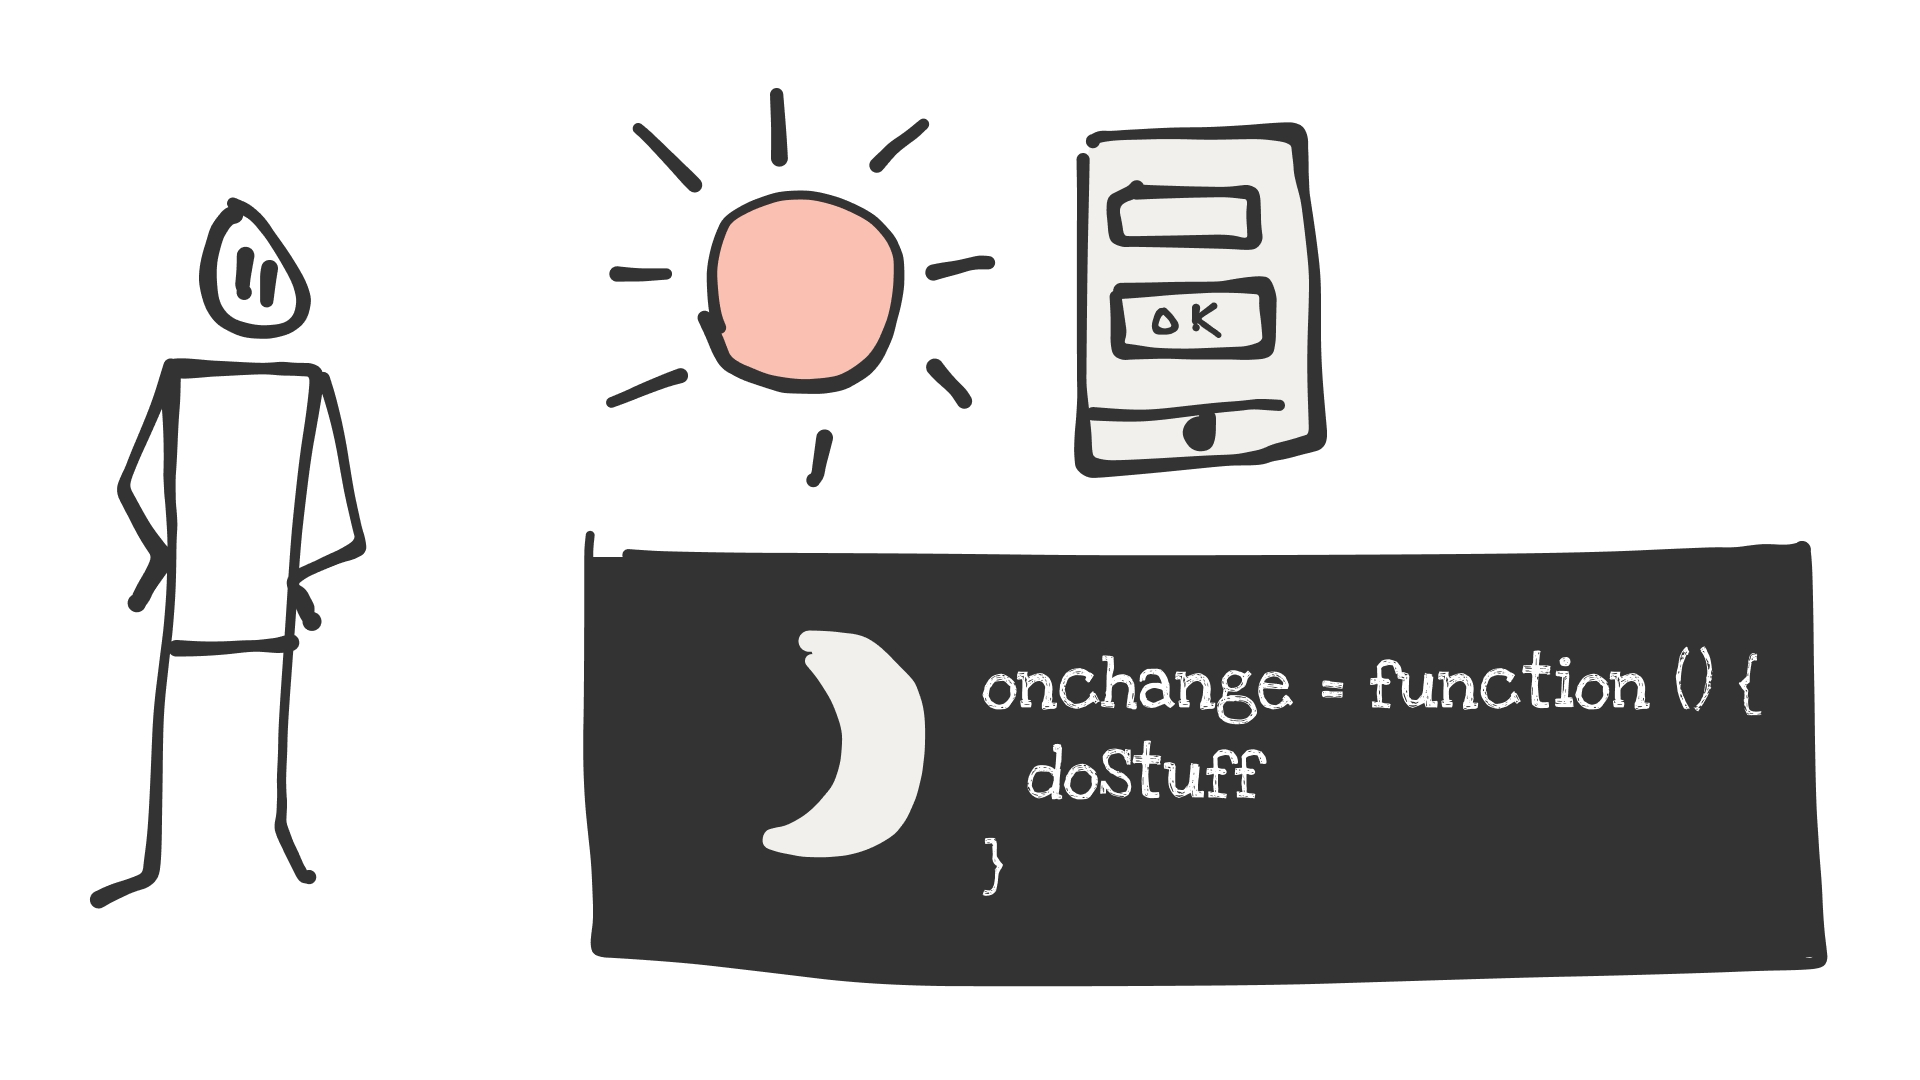 A person (me) with a sun and a mobile app + a moon and some code.